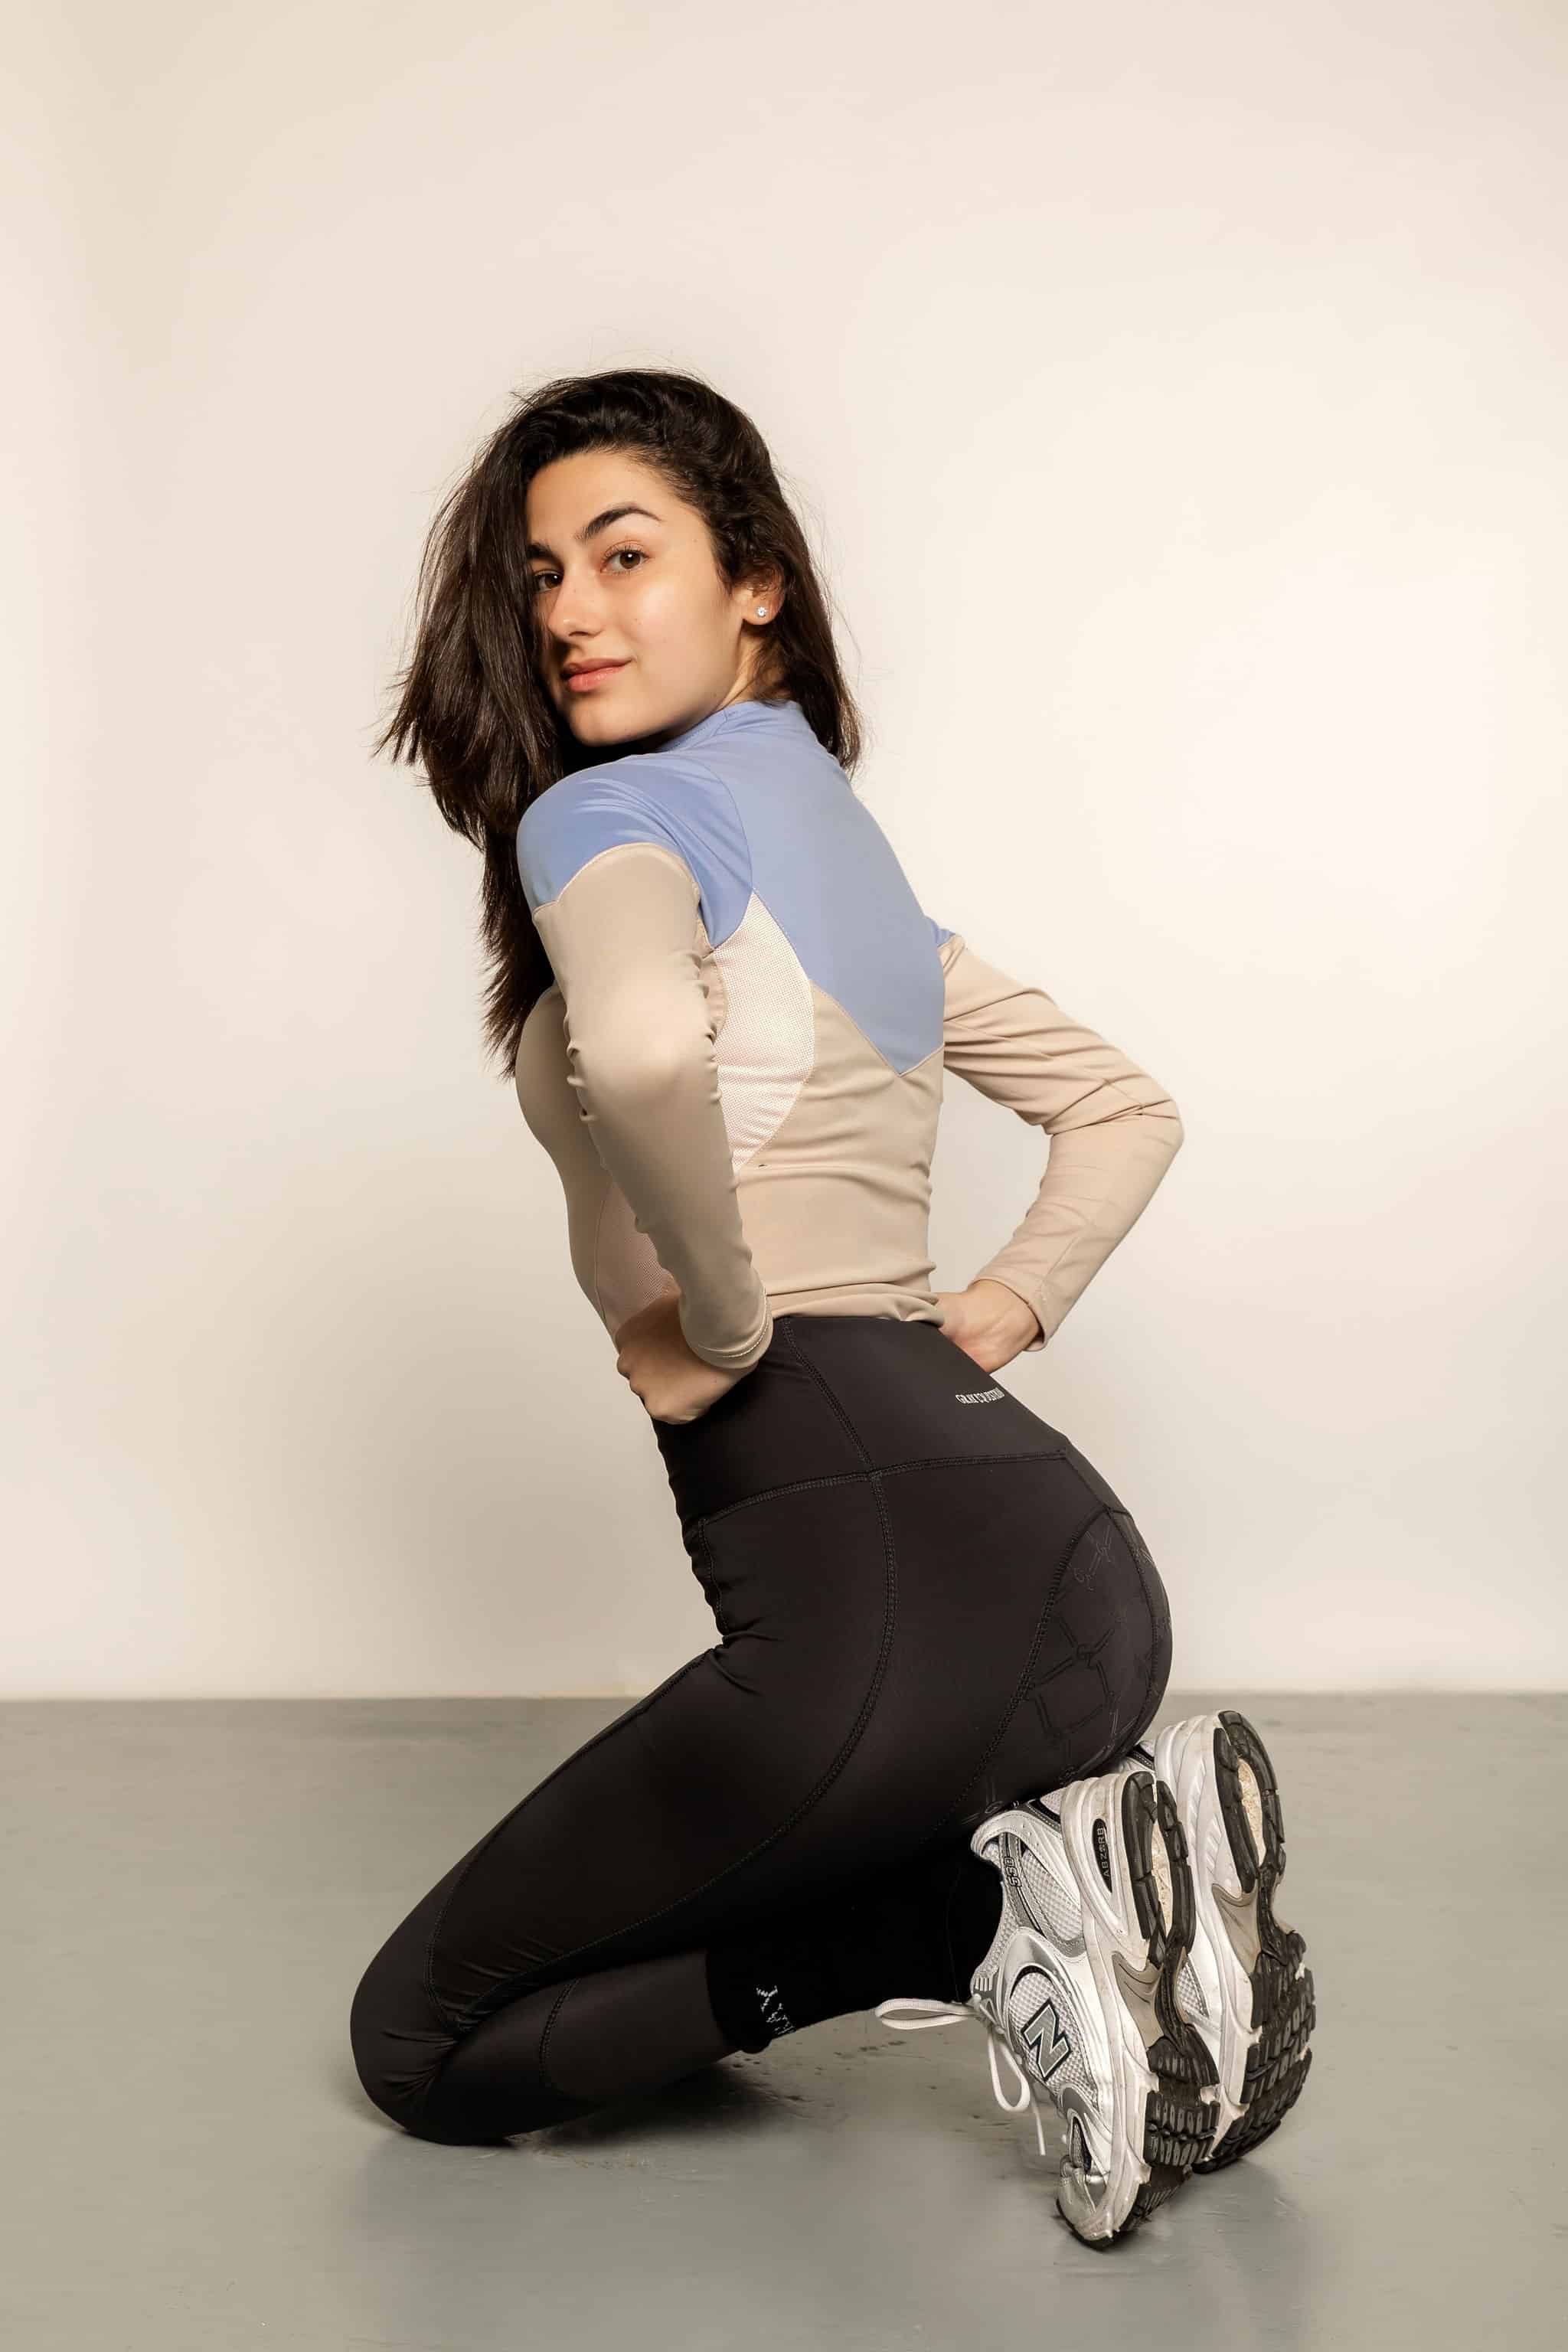 Model leaning down wearing blue &amp; beige base layer with with black leggings.